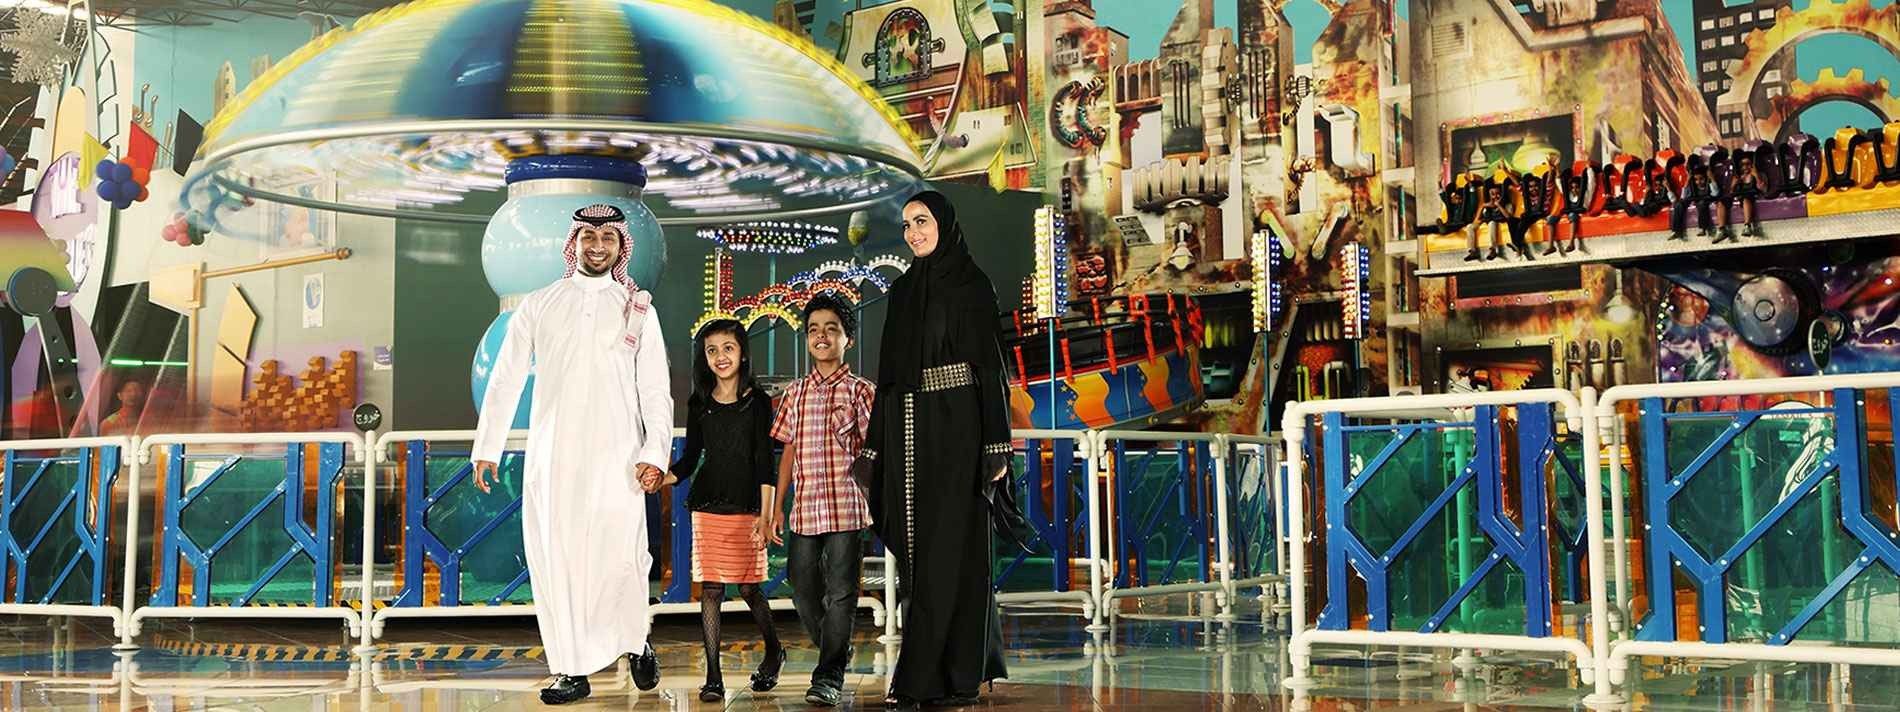 1581206659 898 The best amusement park in Abha .. The best four - The best amusement park in Abha .. The best four theme parks to spend a fun day with your family